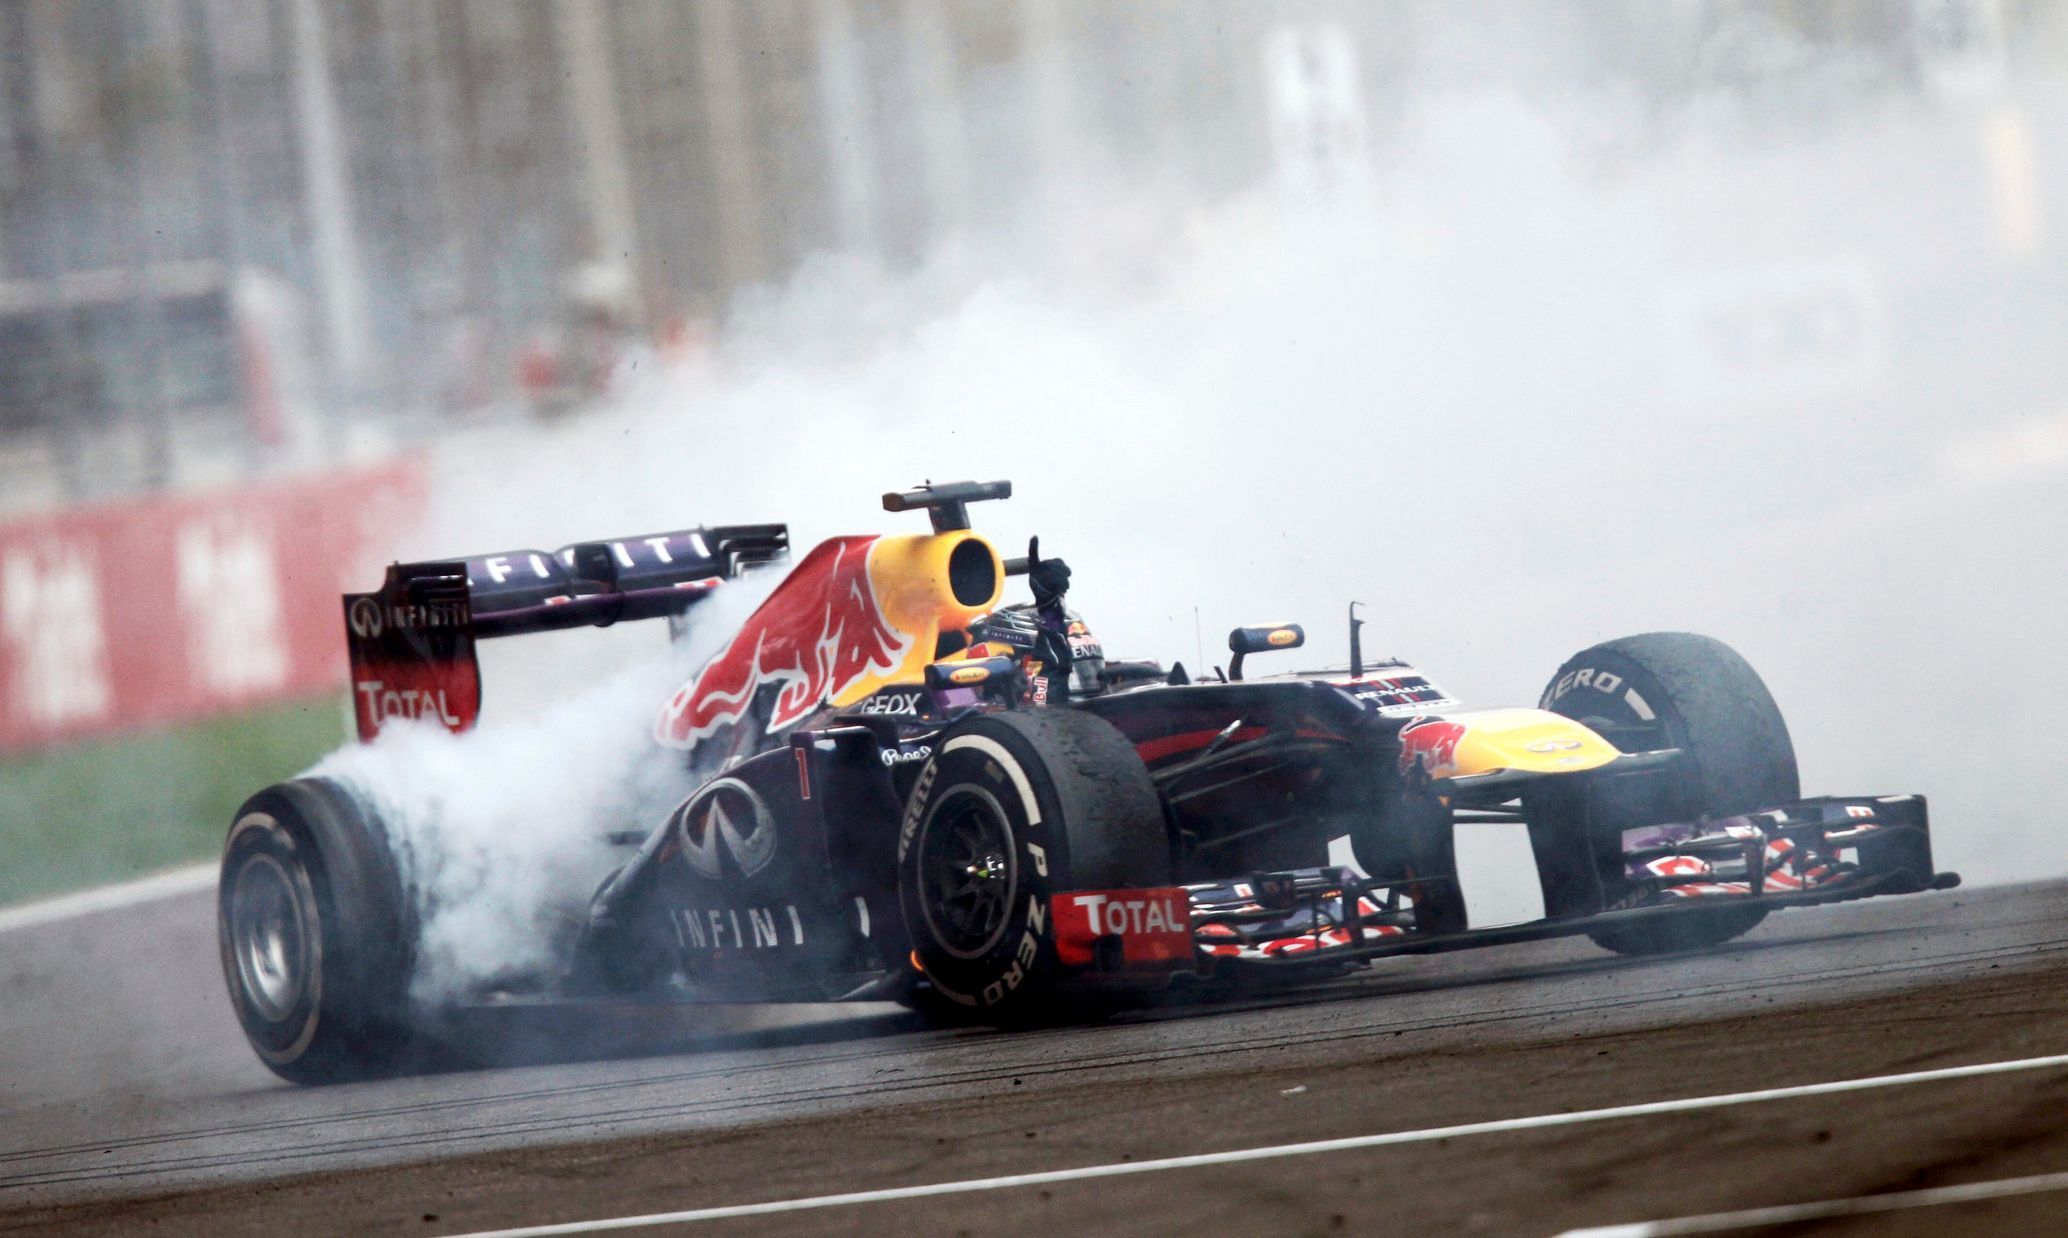 Red Bull Formula One driver Vettel does a burnout to celebrate winning the Indian F1 Grand Prix at the Buddh International Circuit in Greater Noida